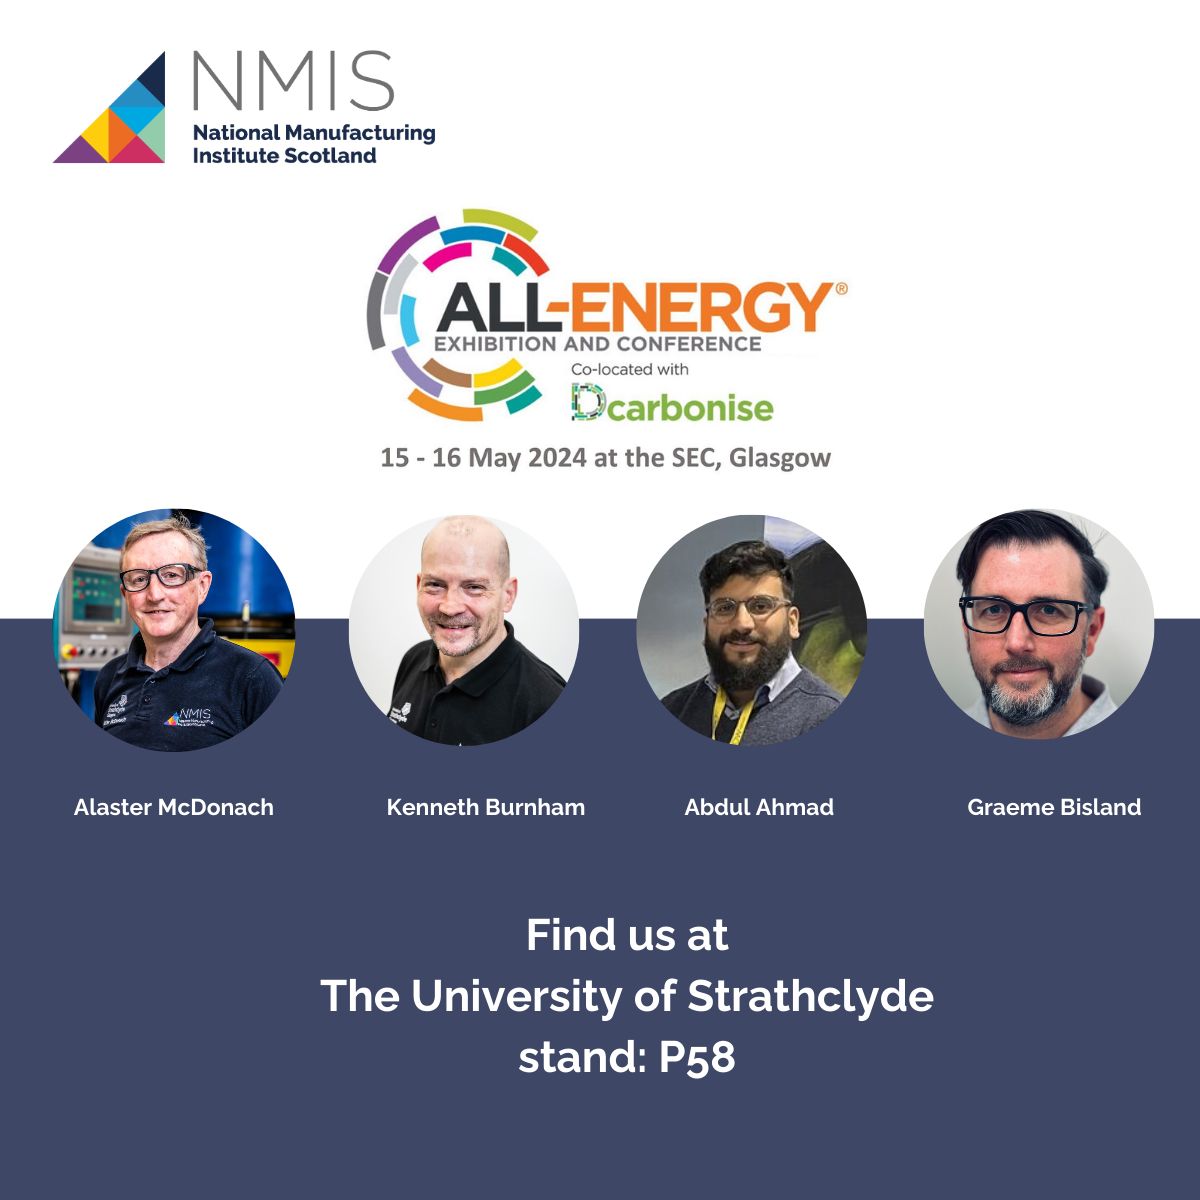 Join us at @AllEnergy this wk! 📆 15-16 May 📍 SEC, Glasgow Visit our stand with @UniStrathclyde & connect with the NMIS team. Plus, meet exhibitors inc @ScotRenew @PNDC_UK & more! Stay tuned for speaker updates. #RenewableEnergy #Innovation #NMISwind